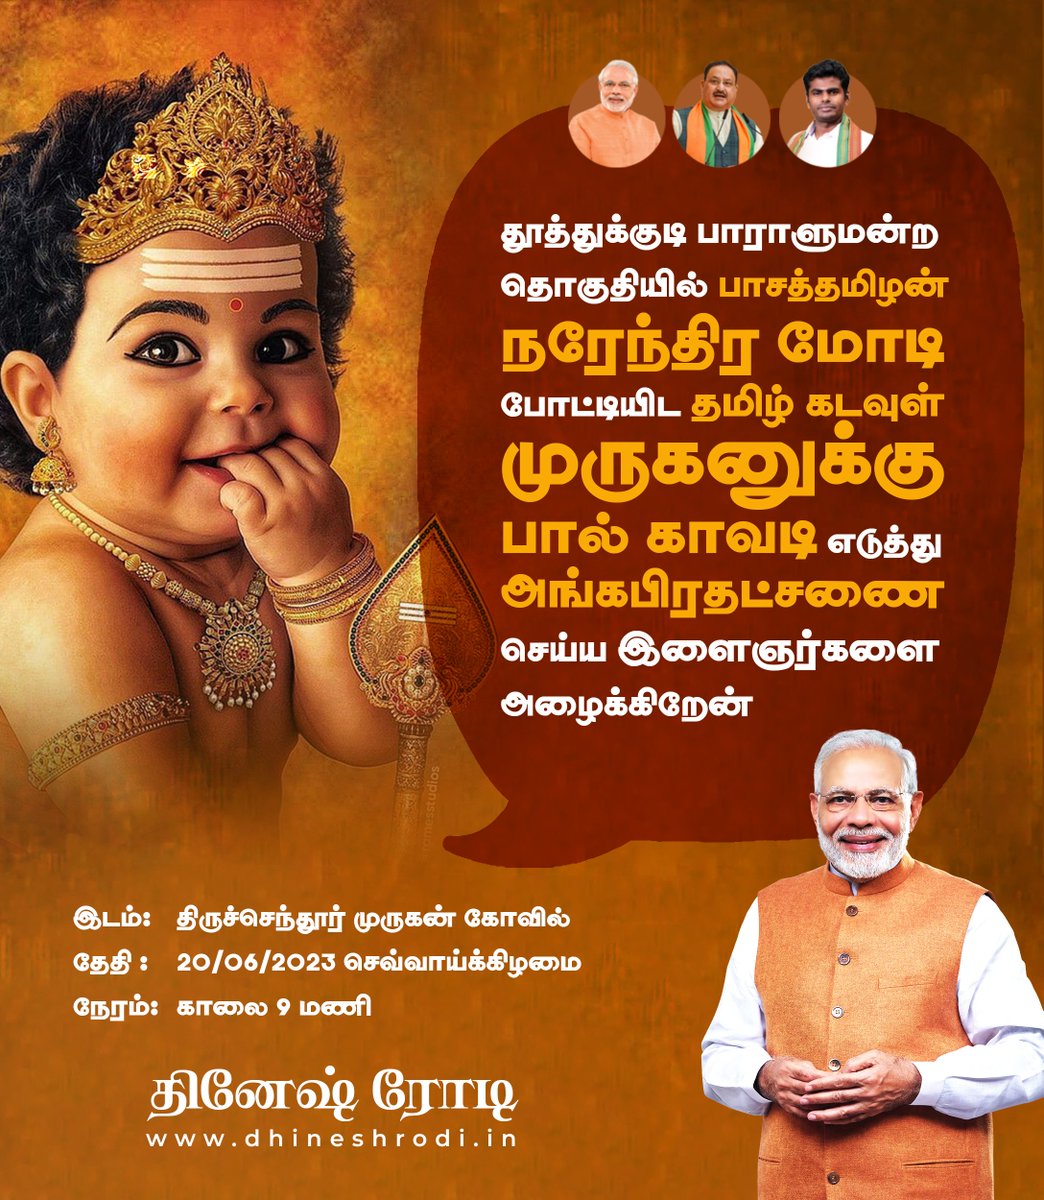 Inviting all youngsters to join the Kavadi Aattam and Angapradhakshan at Tiruchendur Murugar Temple on June 20, 2023 at 9 Am.

Together, let us pray for our beloved Tamilan @narendramodi avl, to contest from Thoothukudi Constituency.

@annamalai_k @AmitShah @JPNadda @blsanthosh